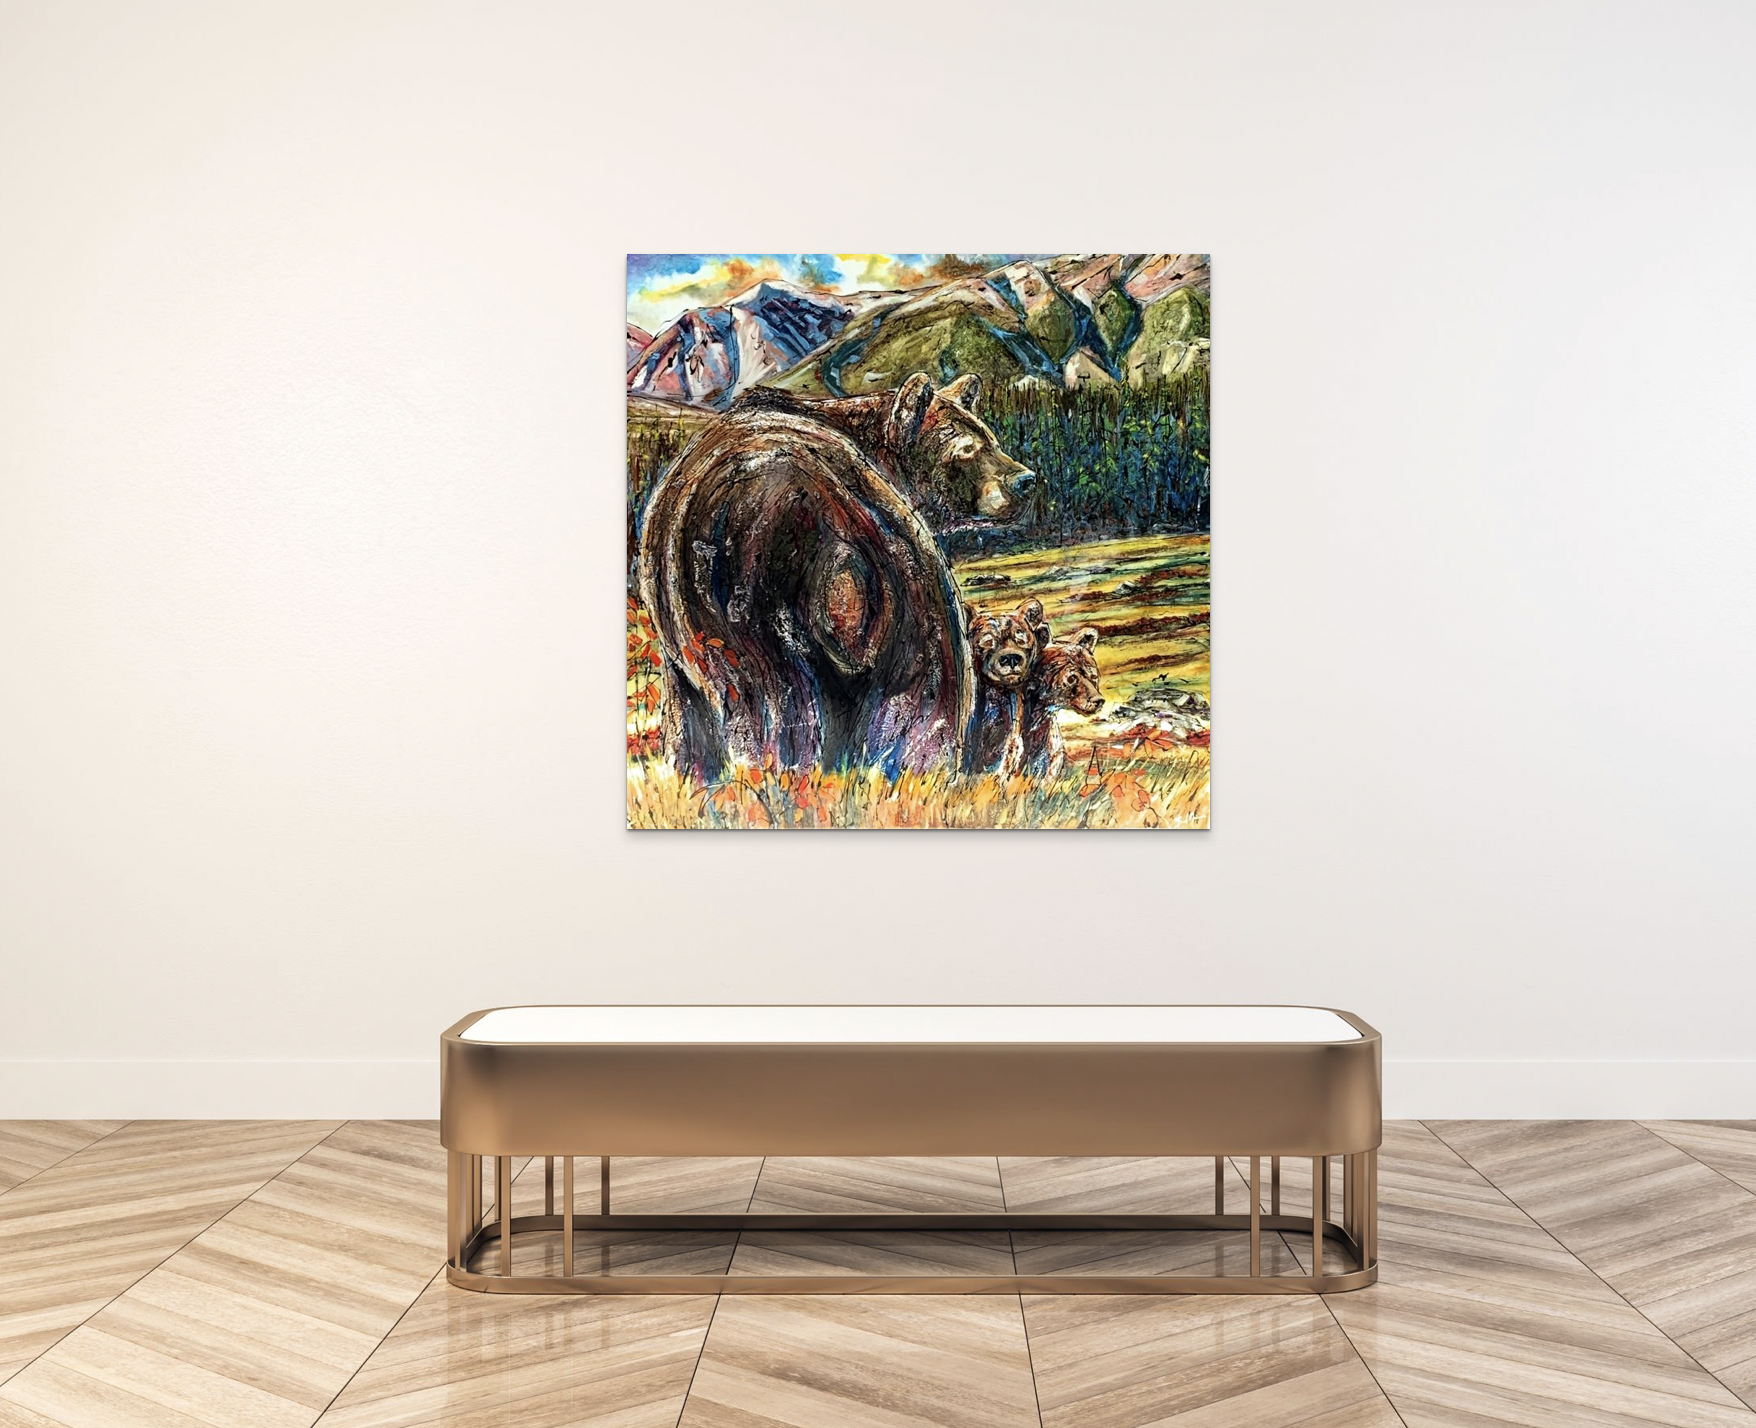 First Summer Vacation, mixed media bear + cubs painting by David Zimmerman | Effusion Art Gallery + Cast Glass Studio, Invermere BC